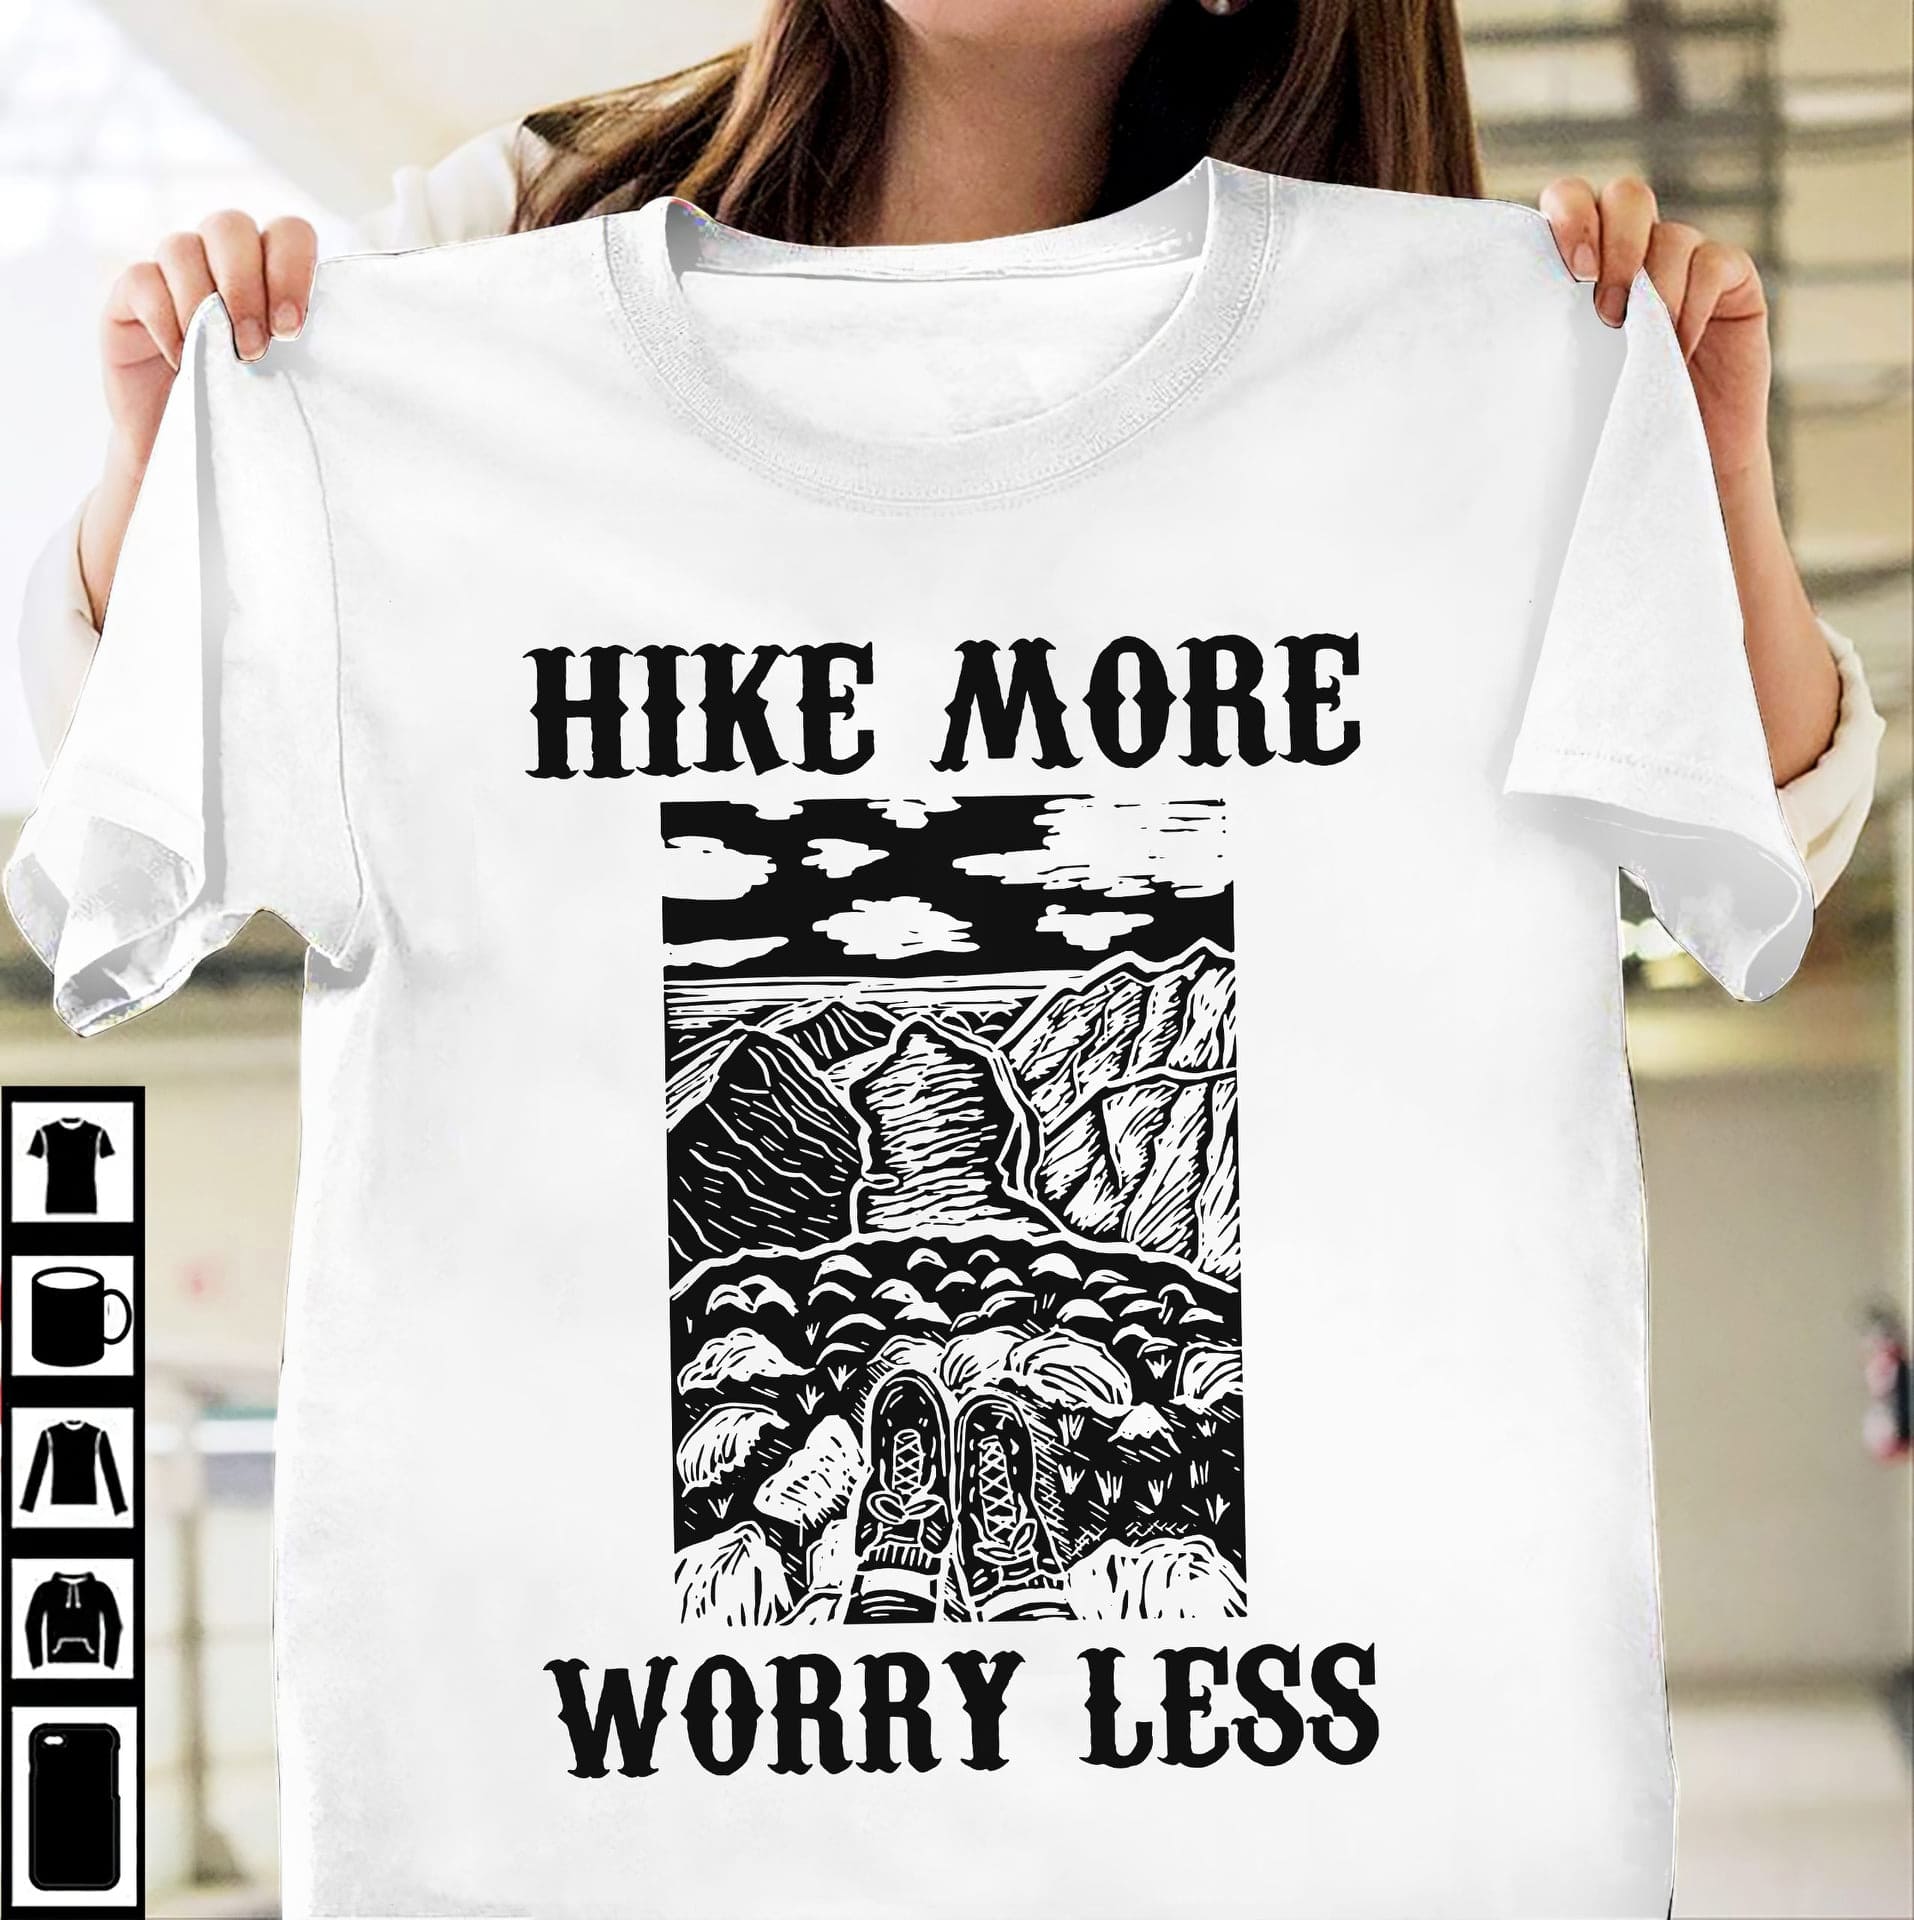 Hike more worry less - Hiking on the mountain, life's better with hiking